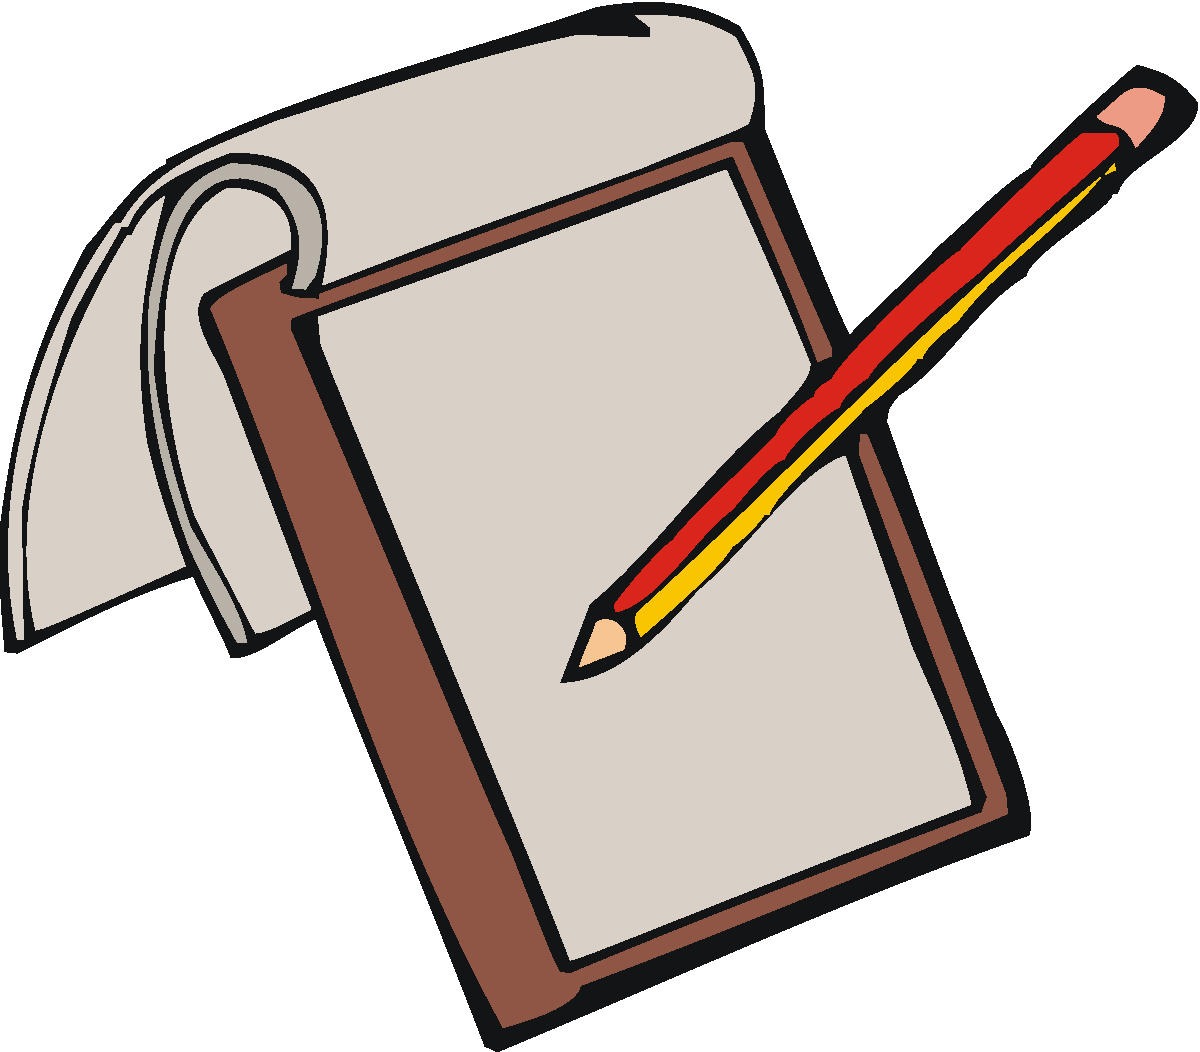 Pencil And Paper Writing Clipart Pencil And Paper Clipart